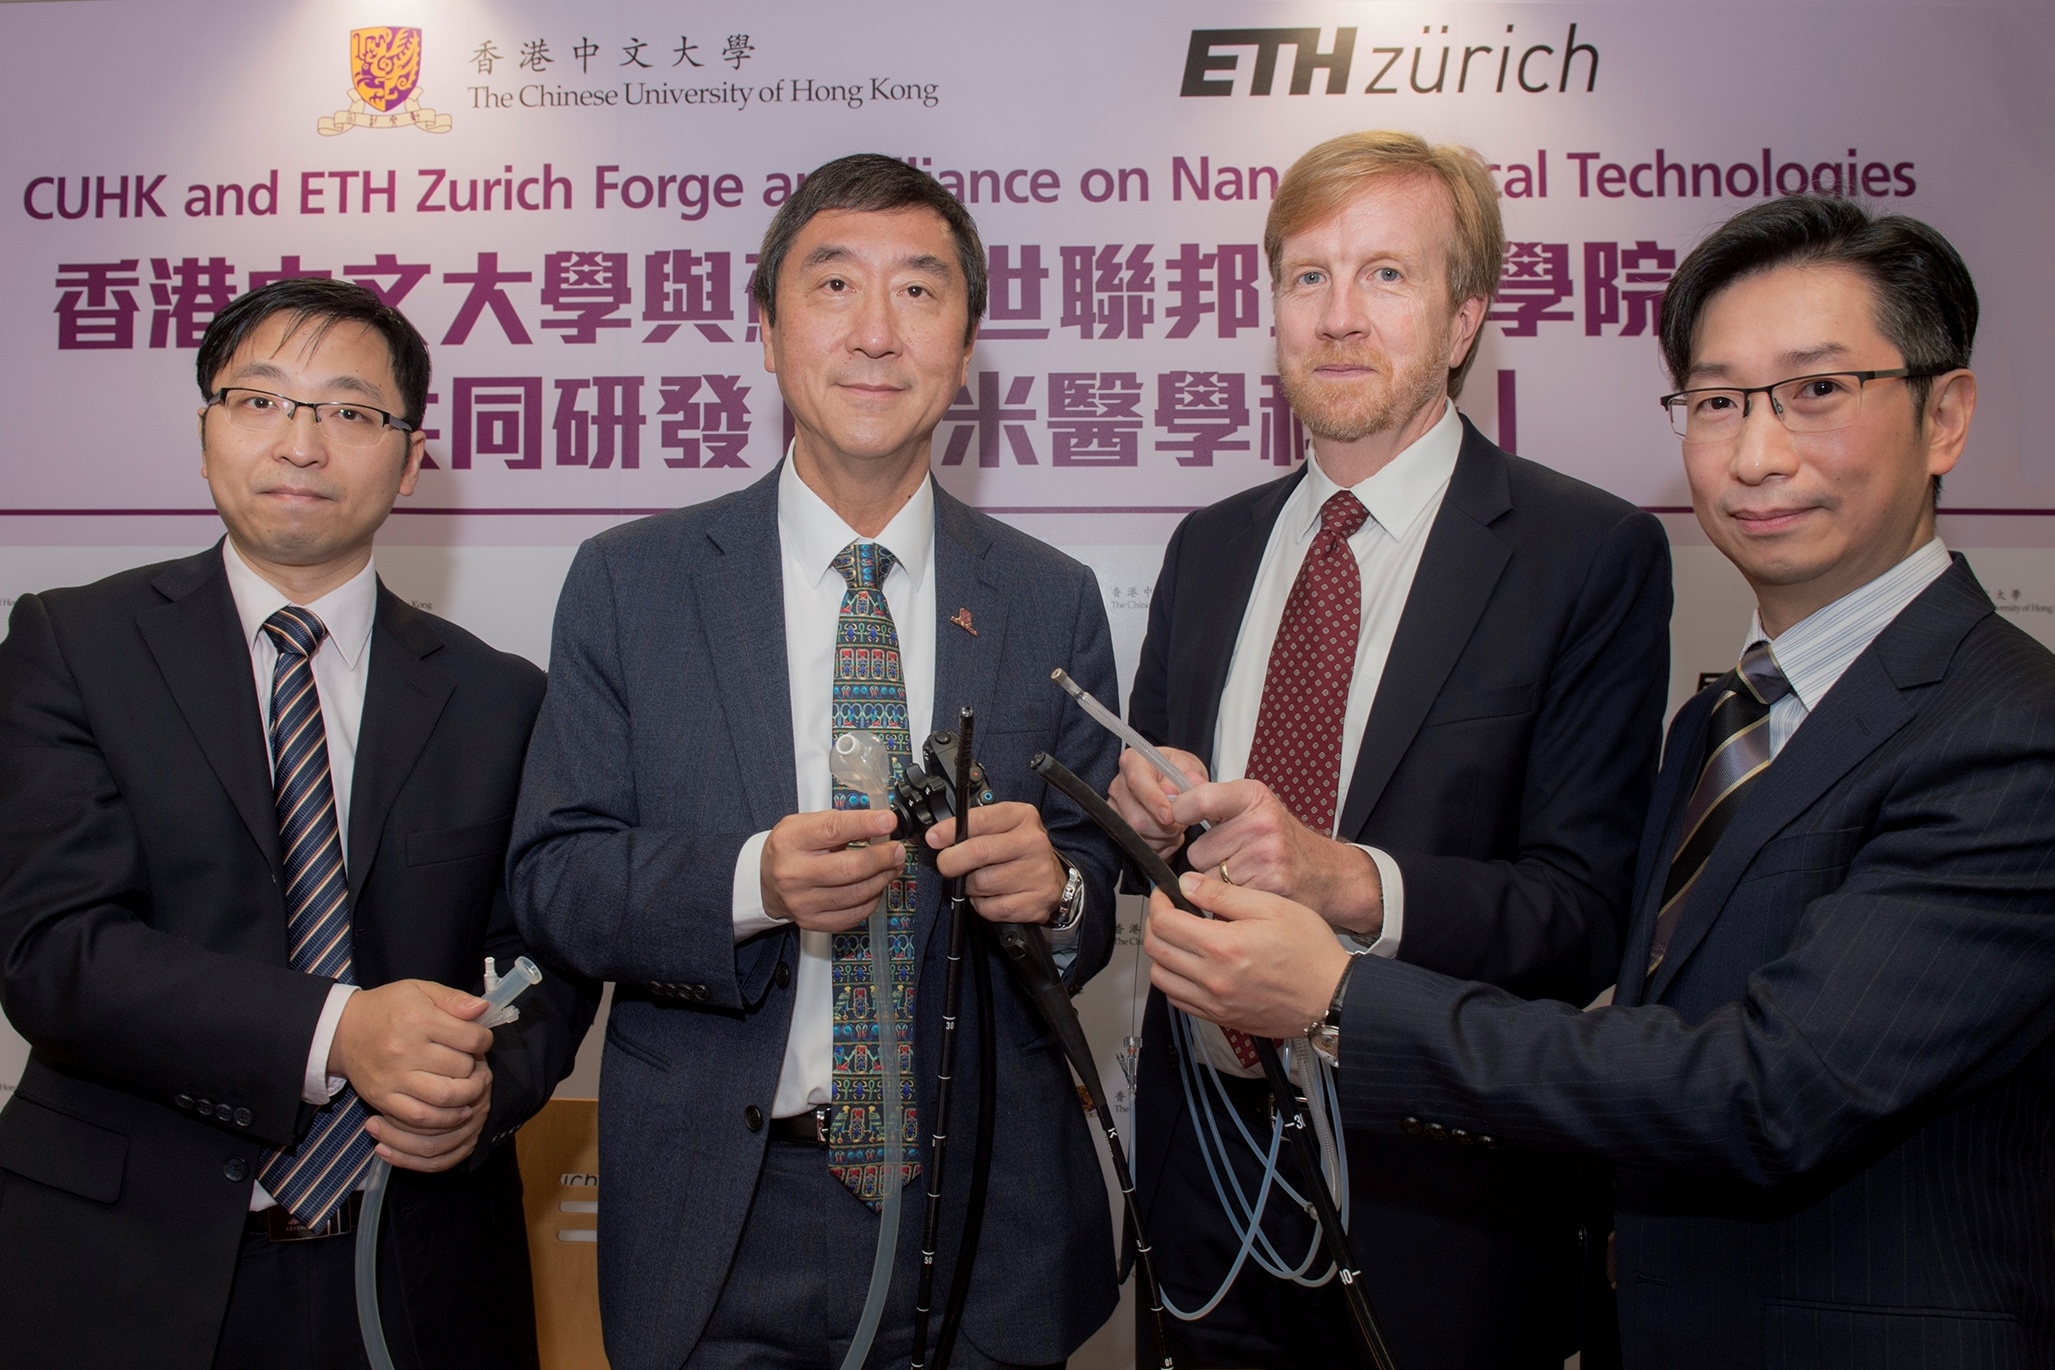  The Chinese University of Hong Kong (CUHK) and ETH Zurich are forging an alliance to develop innovative technologies for gastrointestinal diseases. (From left) Prof. Li ZHANG, Assistant Professor, Department of Mechanical and Automation Engineering, CUHK; Prof. Joseph SUNG, Vice-Chancellor and President, CUHK; Prof. Dr. Bradley NELSON, Head of Institute of Robotics and Intelligent Systems, ETH Zurich and Prof. Philip CHIU, Director of the Chow Yuk Ho Technology Centre for Innovative Medicine, Faculty of Medicine, CUHK.